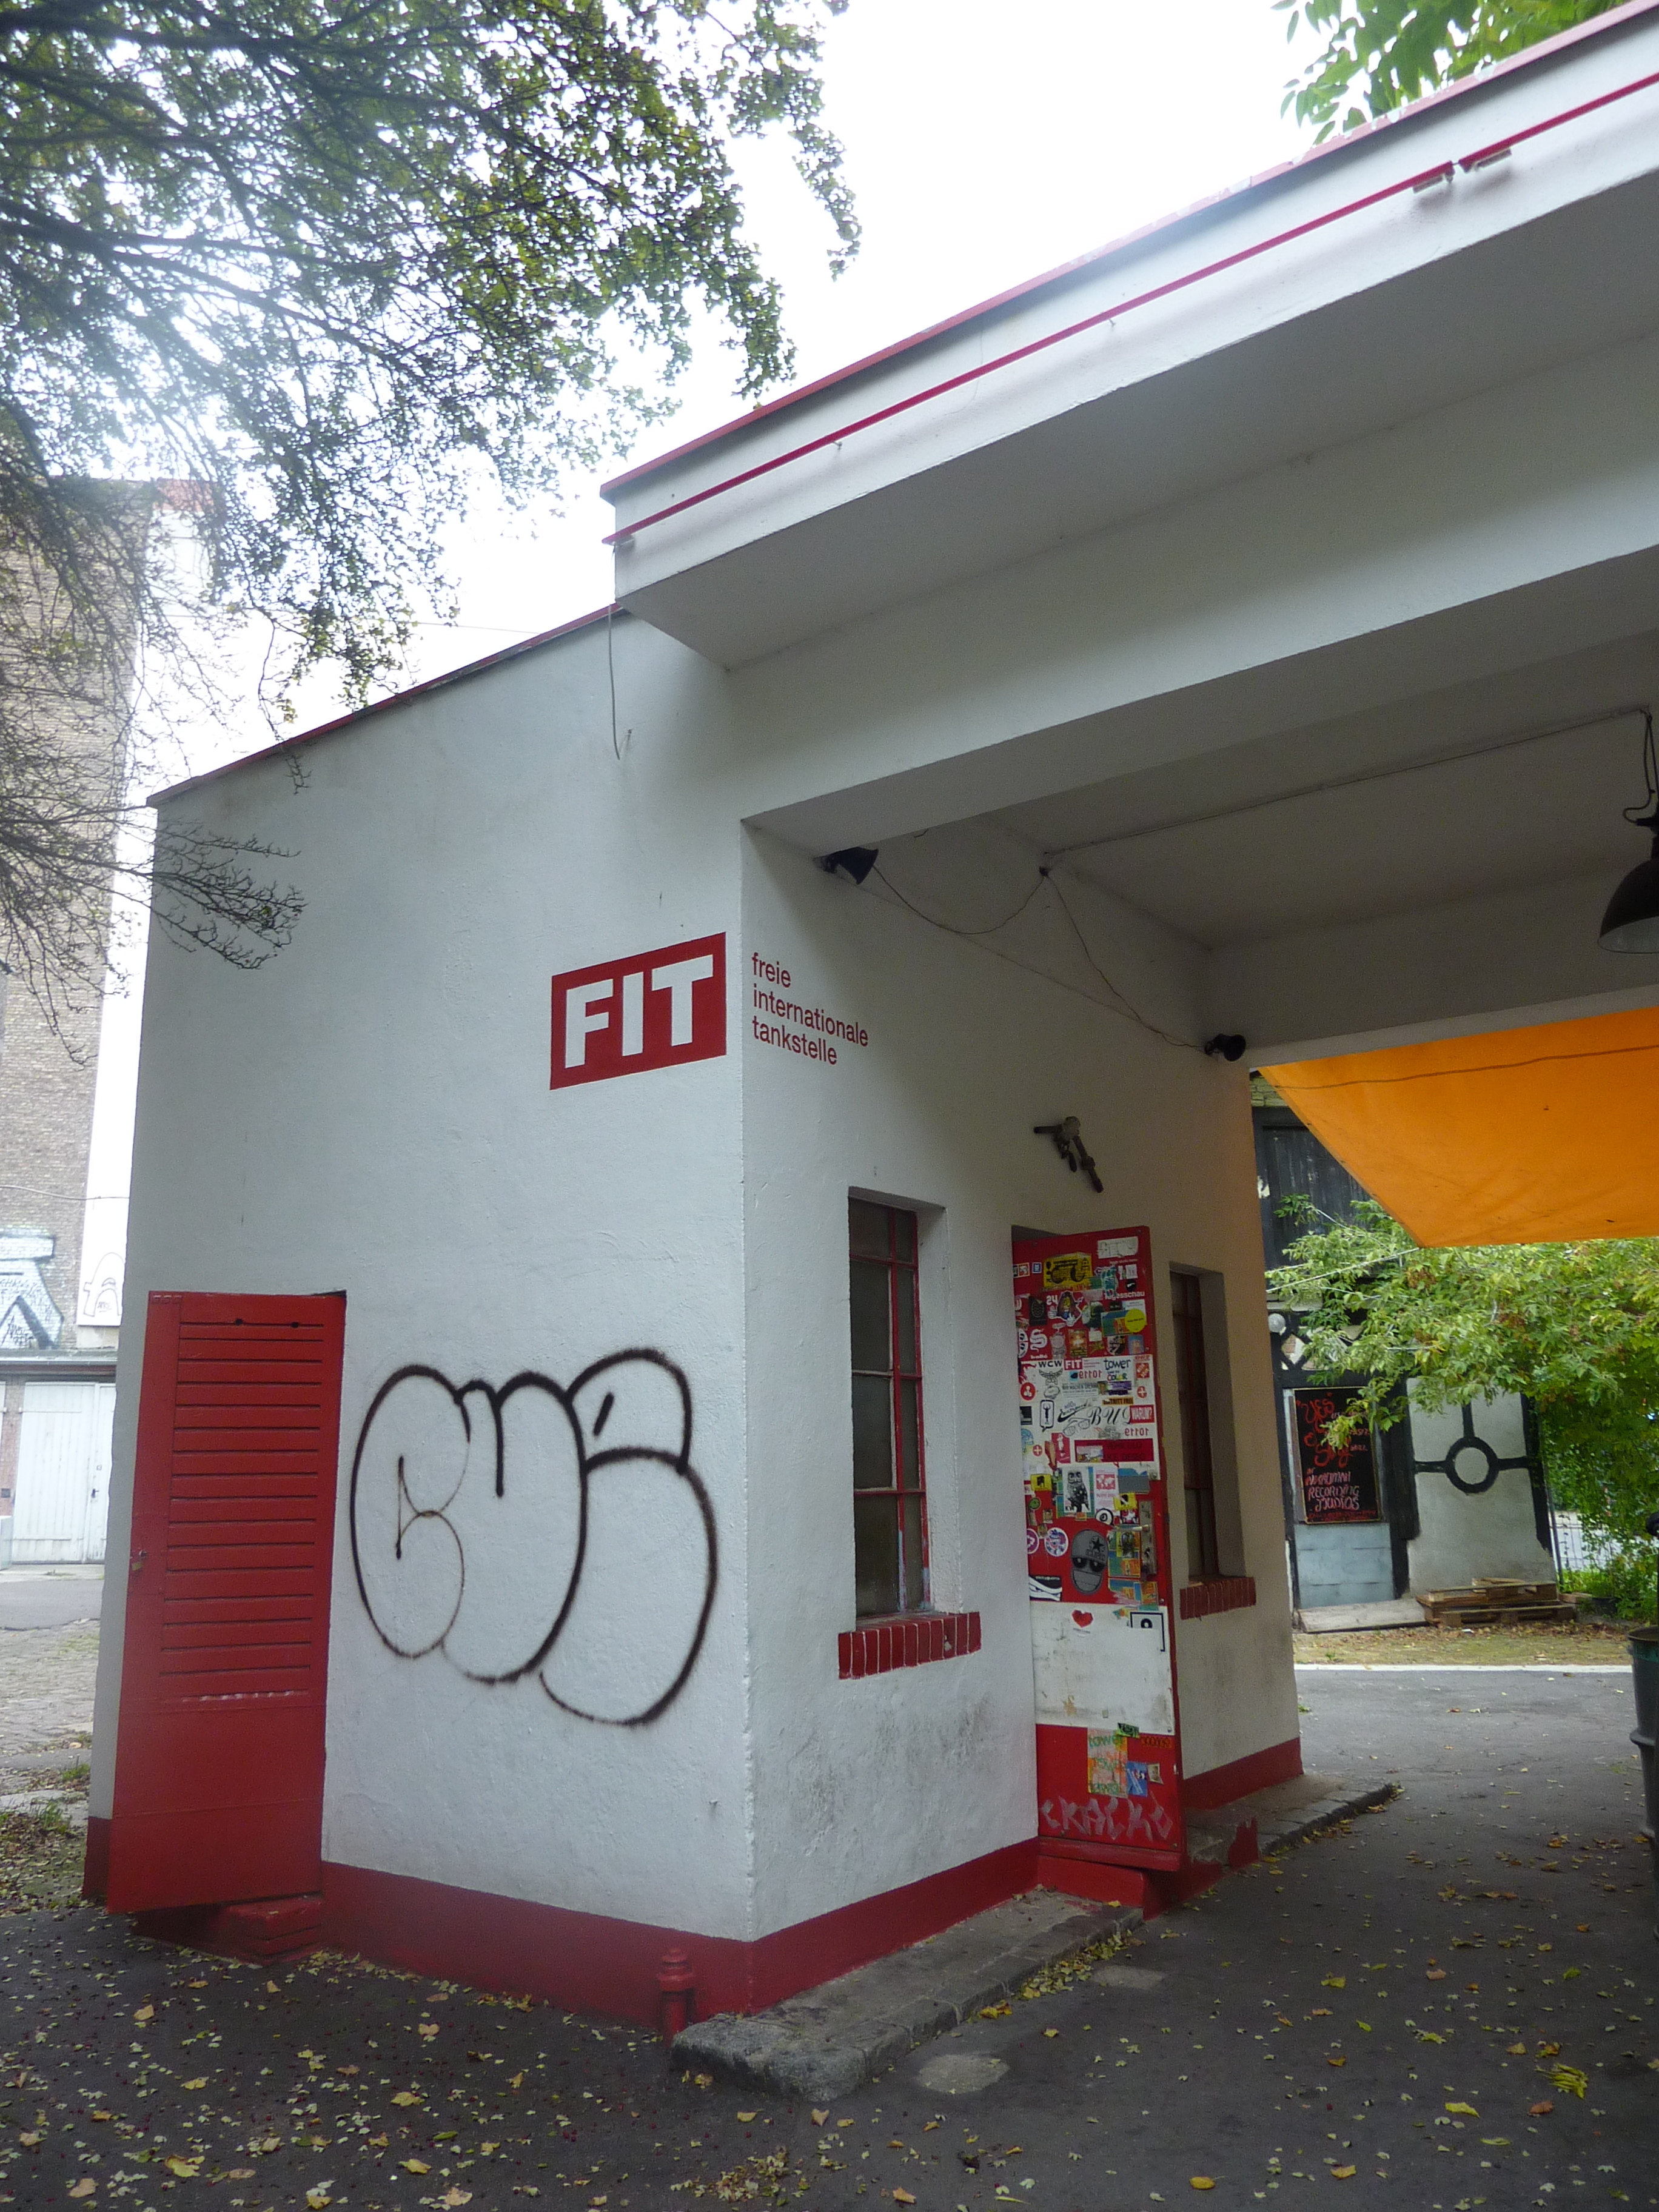 FIT gas station